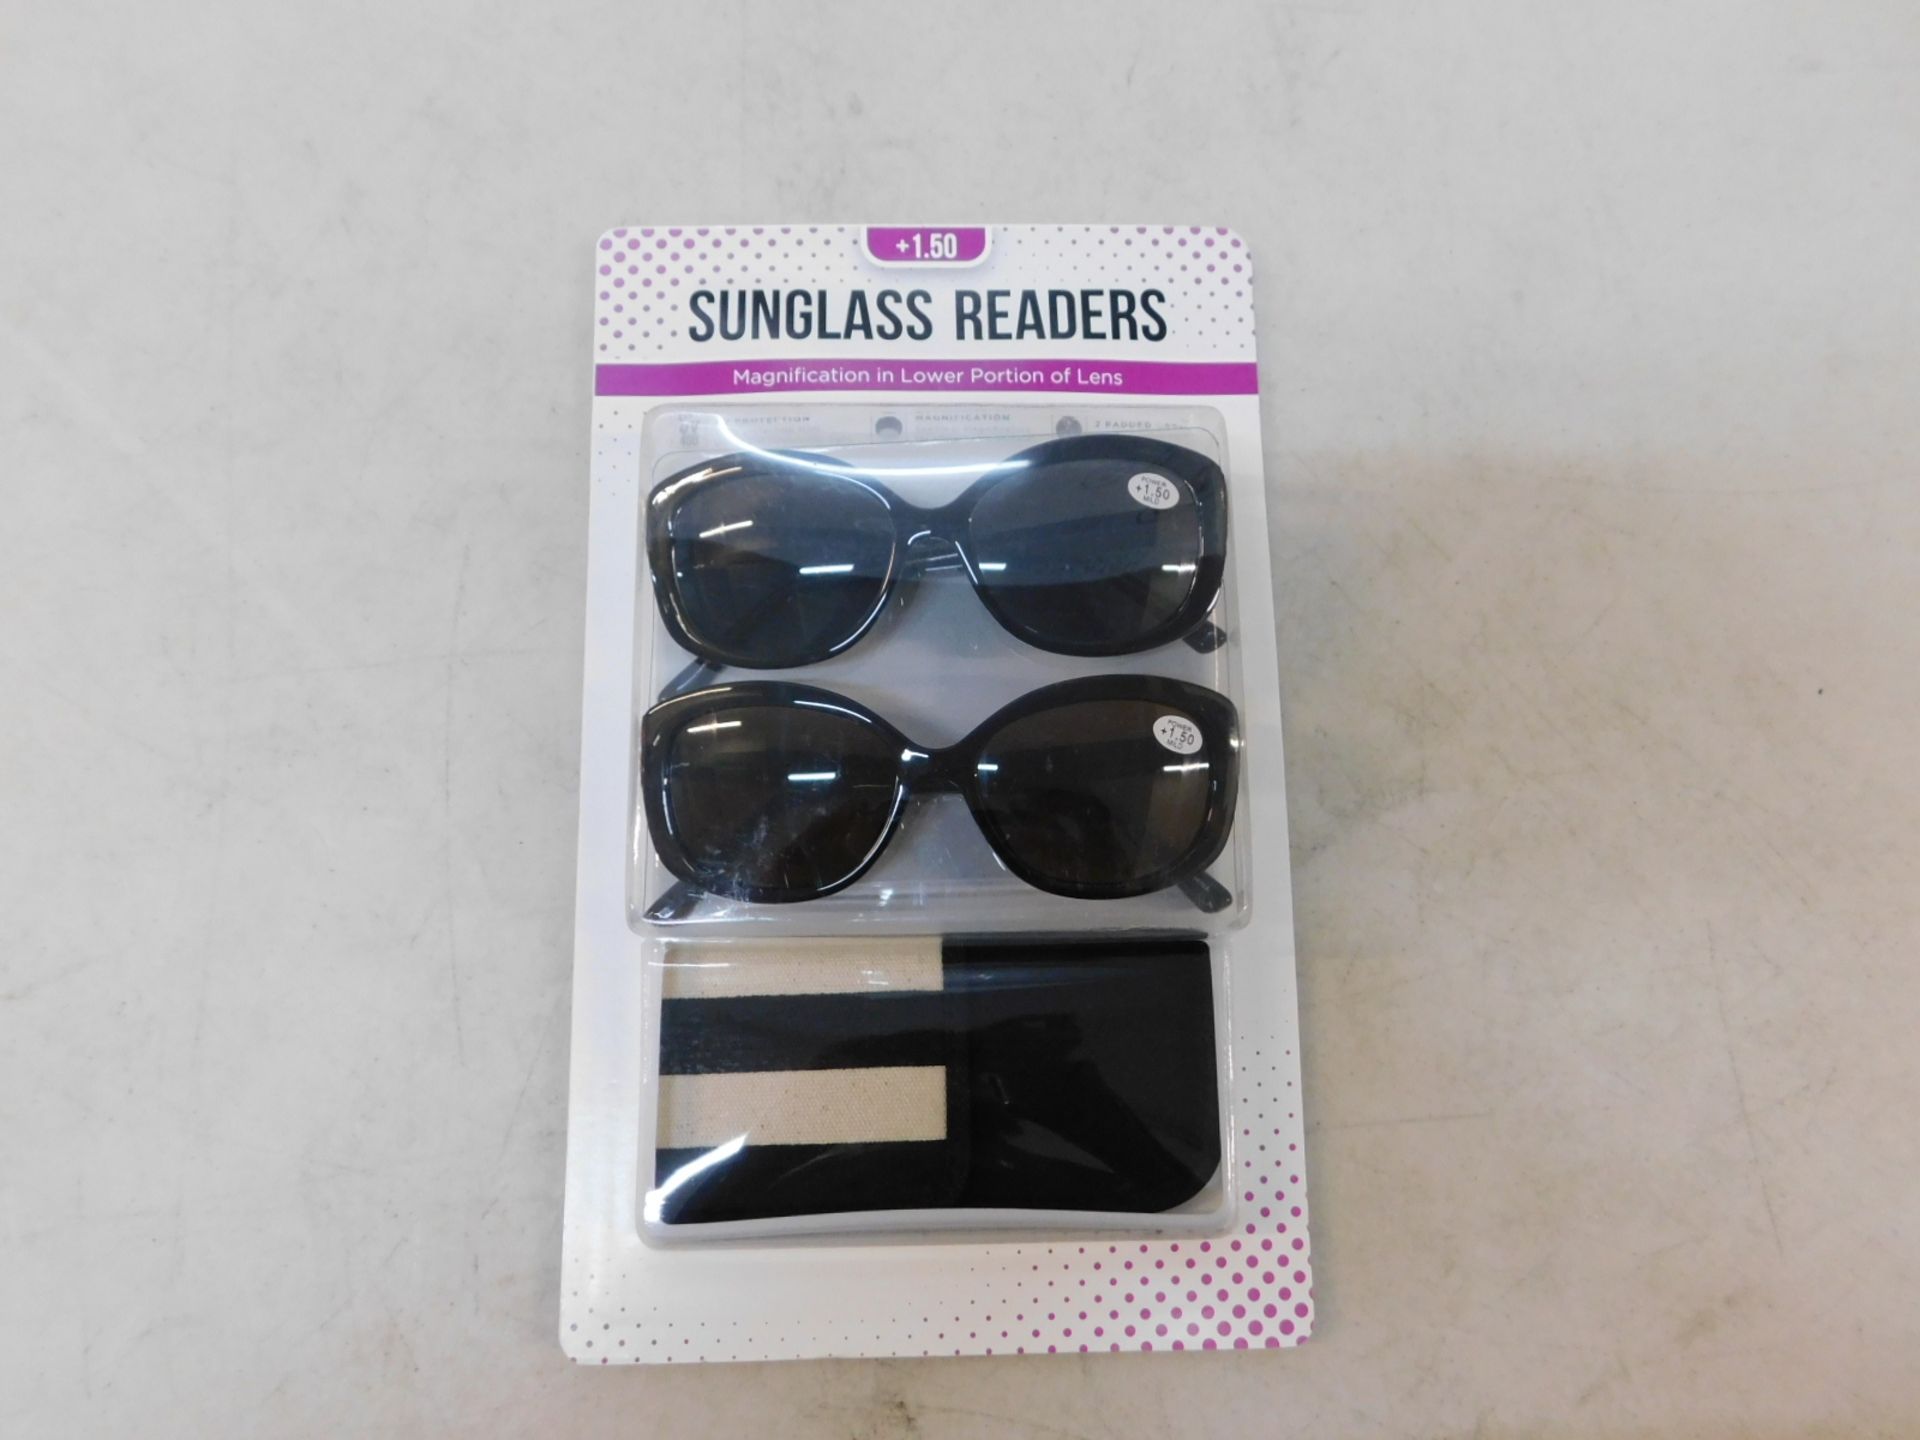 1 BRAND NEW PACK OF SUNGLASS READERS IN +1.75 STRENGTH RRP Â£19.99